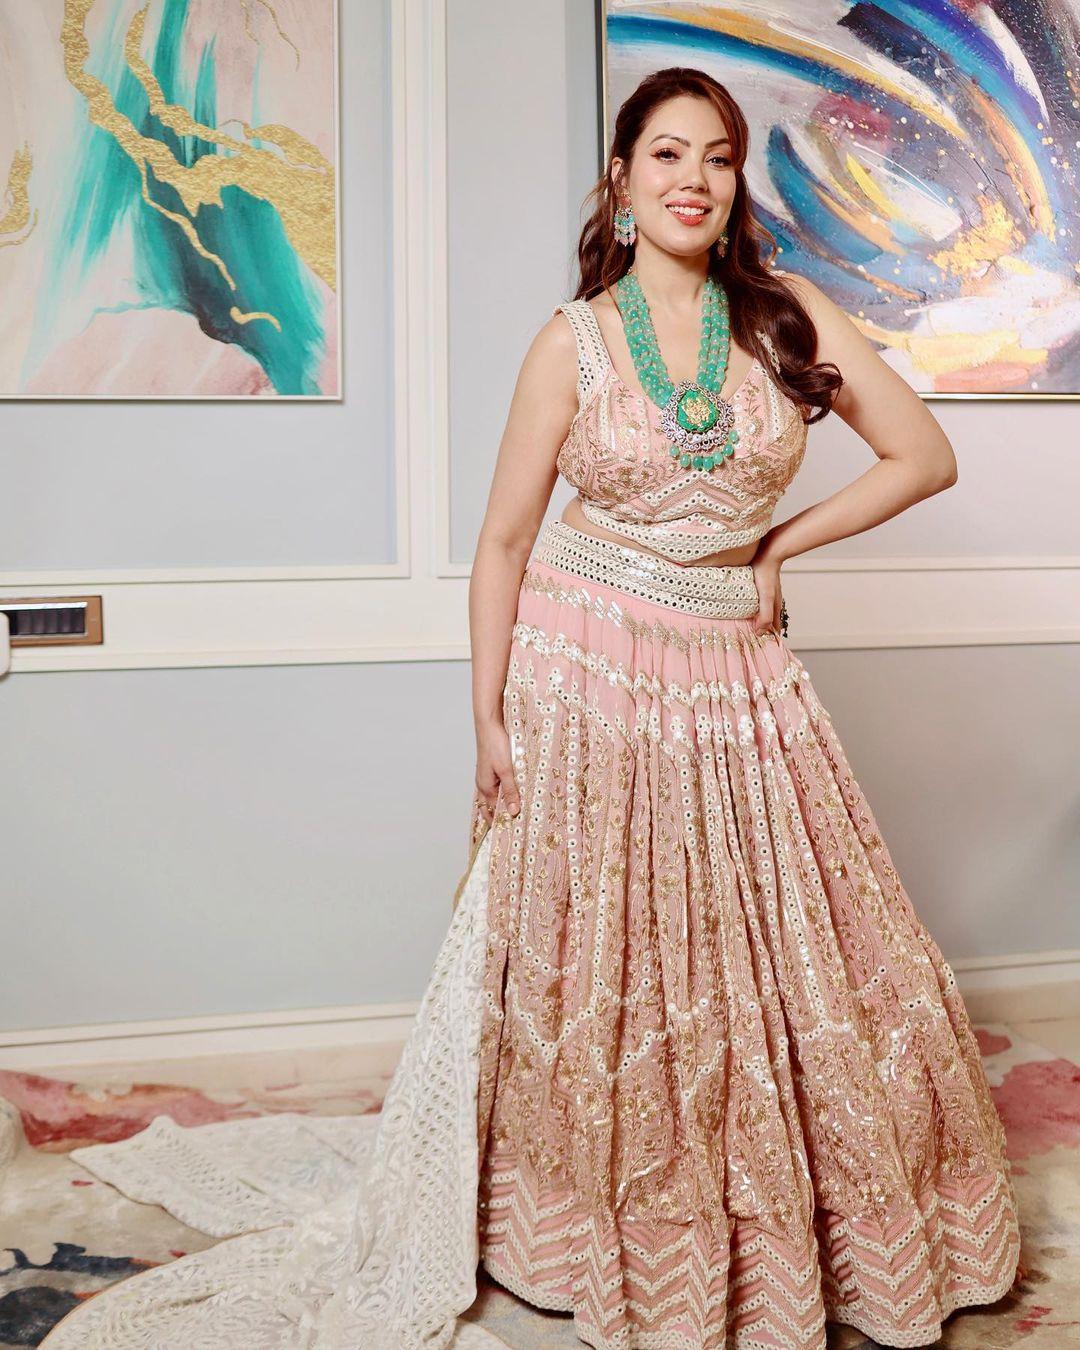 In this look, Munmun wore a stunning peach-coloured lehenga and added a touch of playfulness by adding contrasting green jewellery